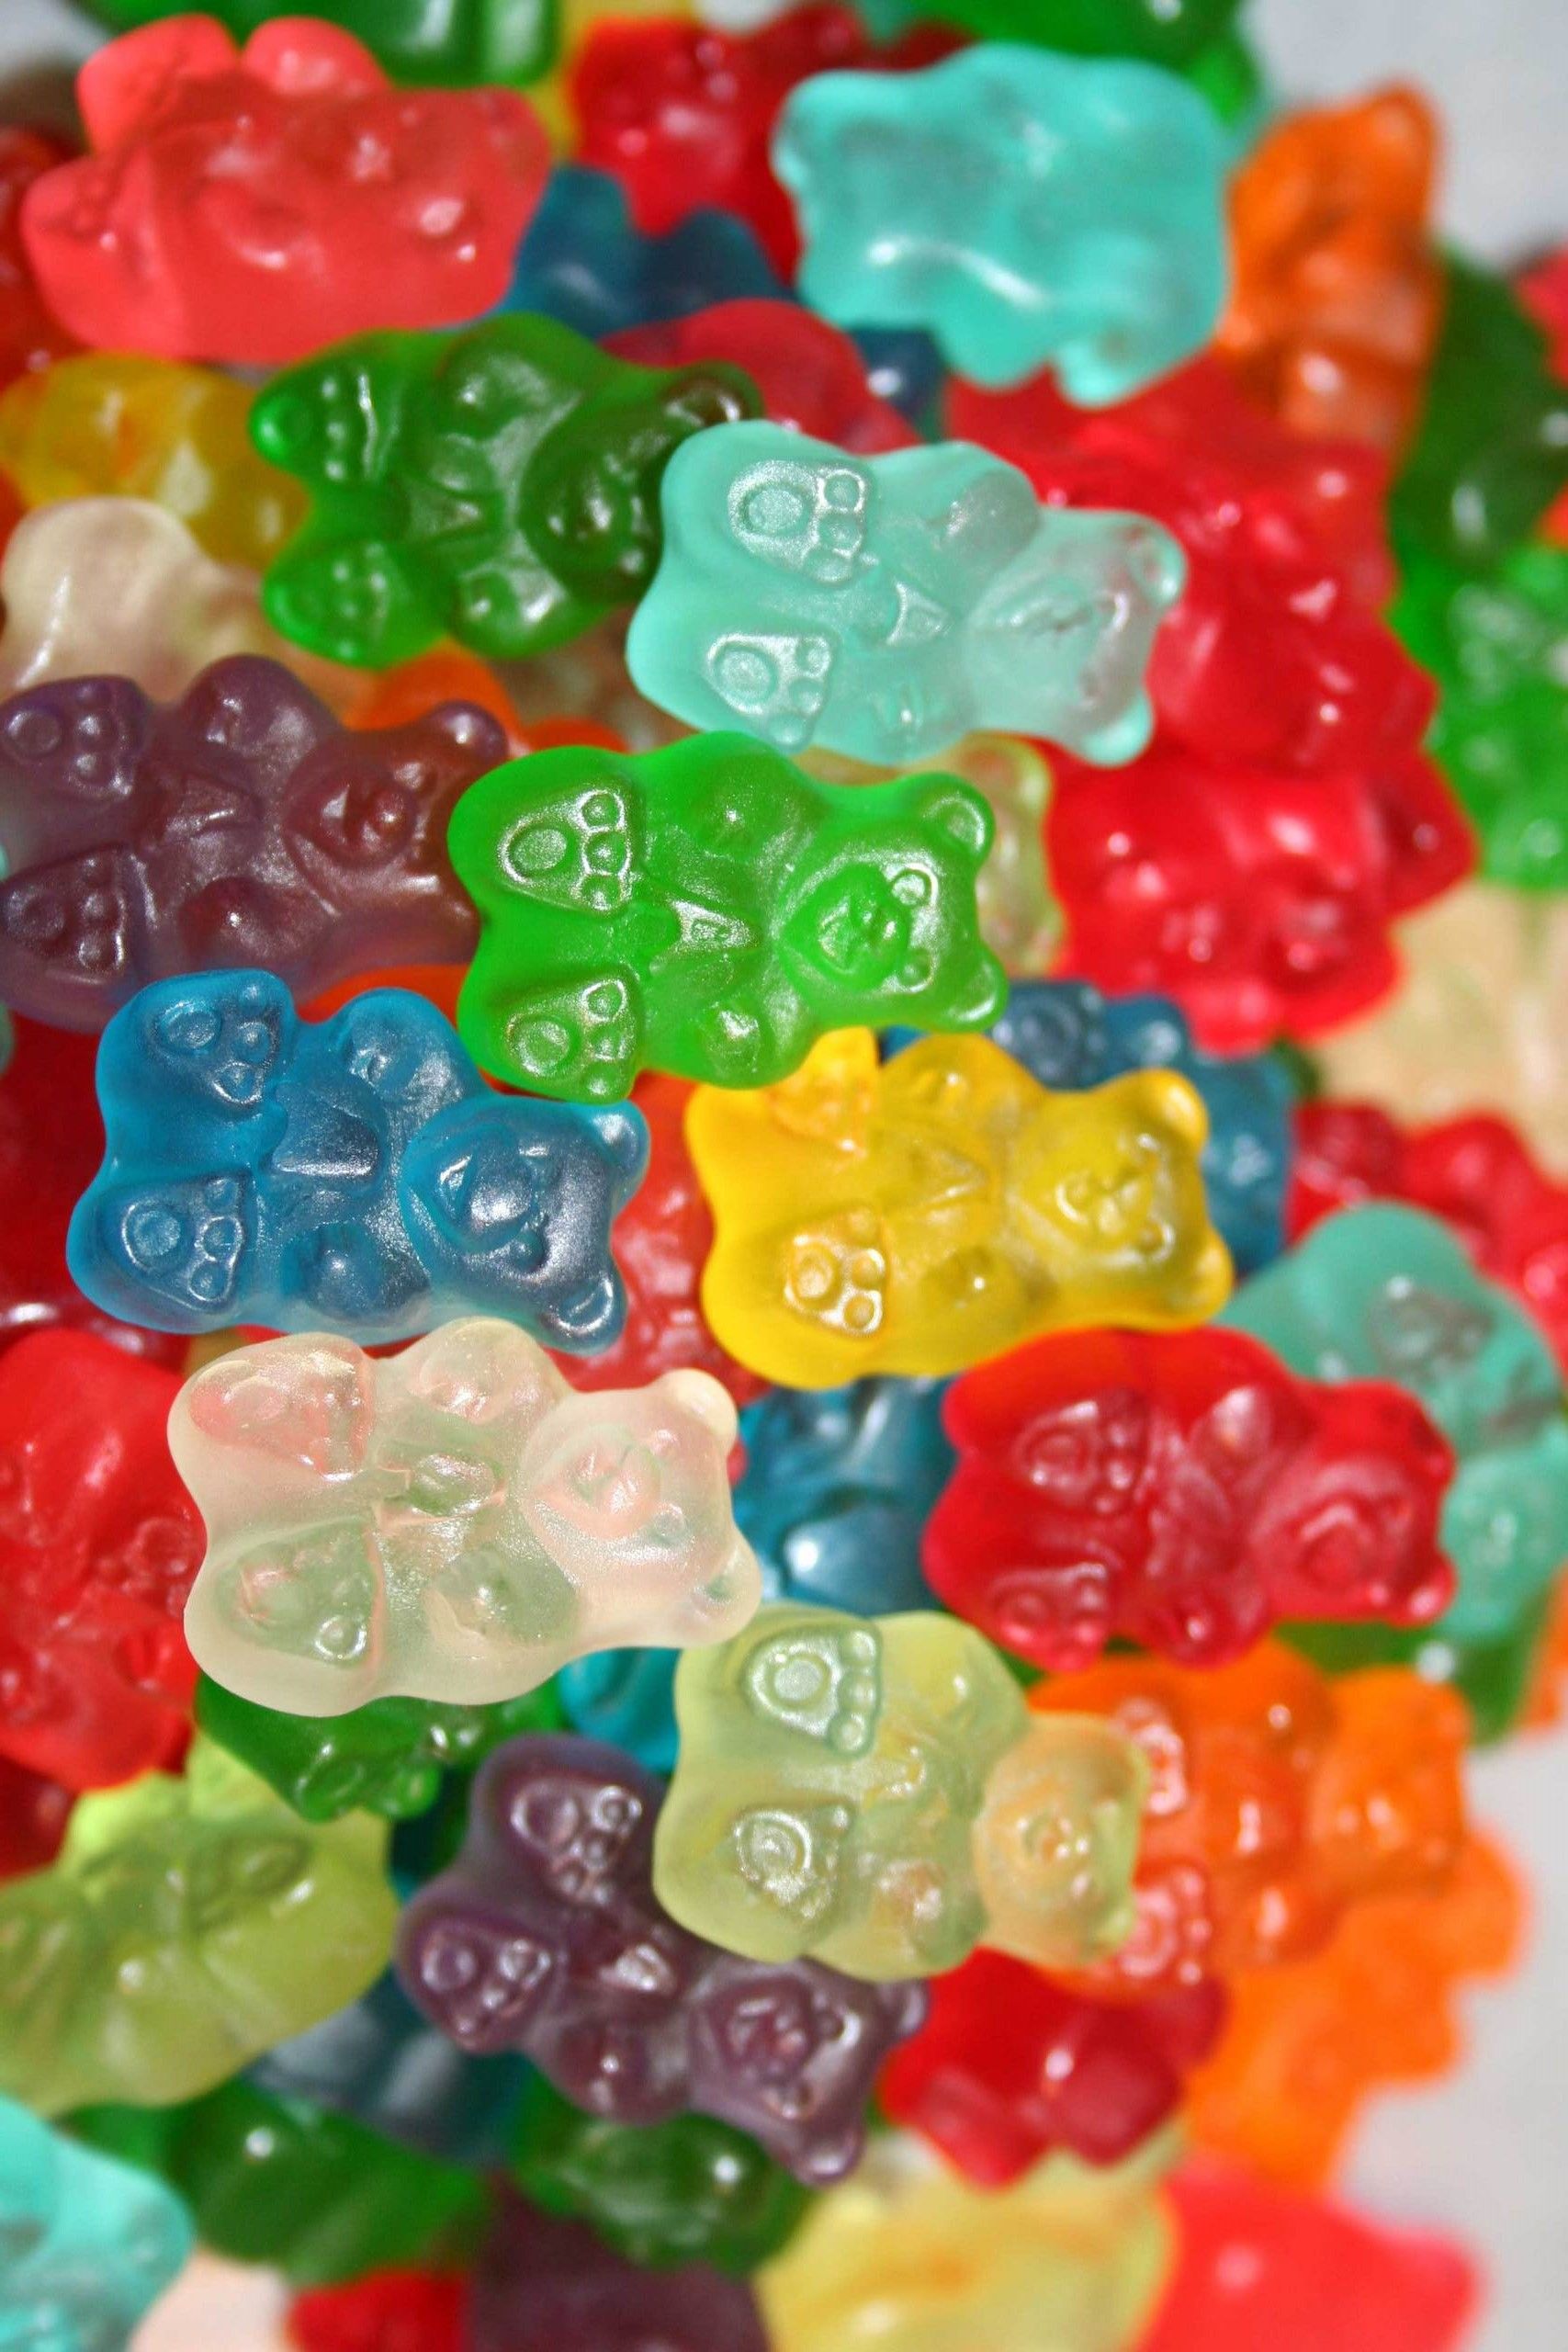 snacks wallpaper,gummi candy,gummy bear,candy,jelly babies,confectionery